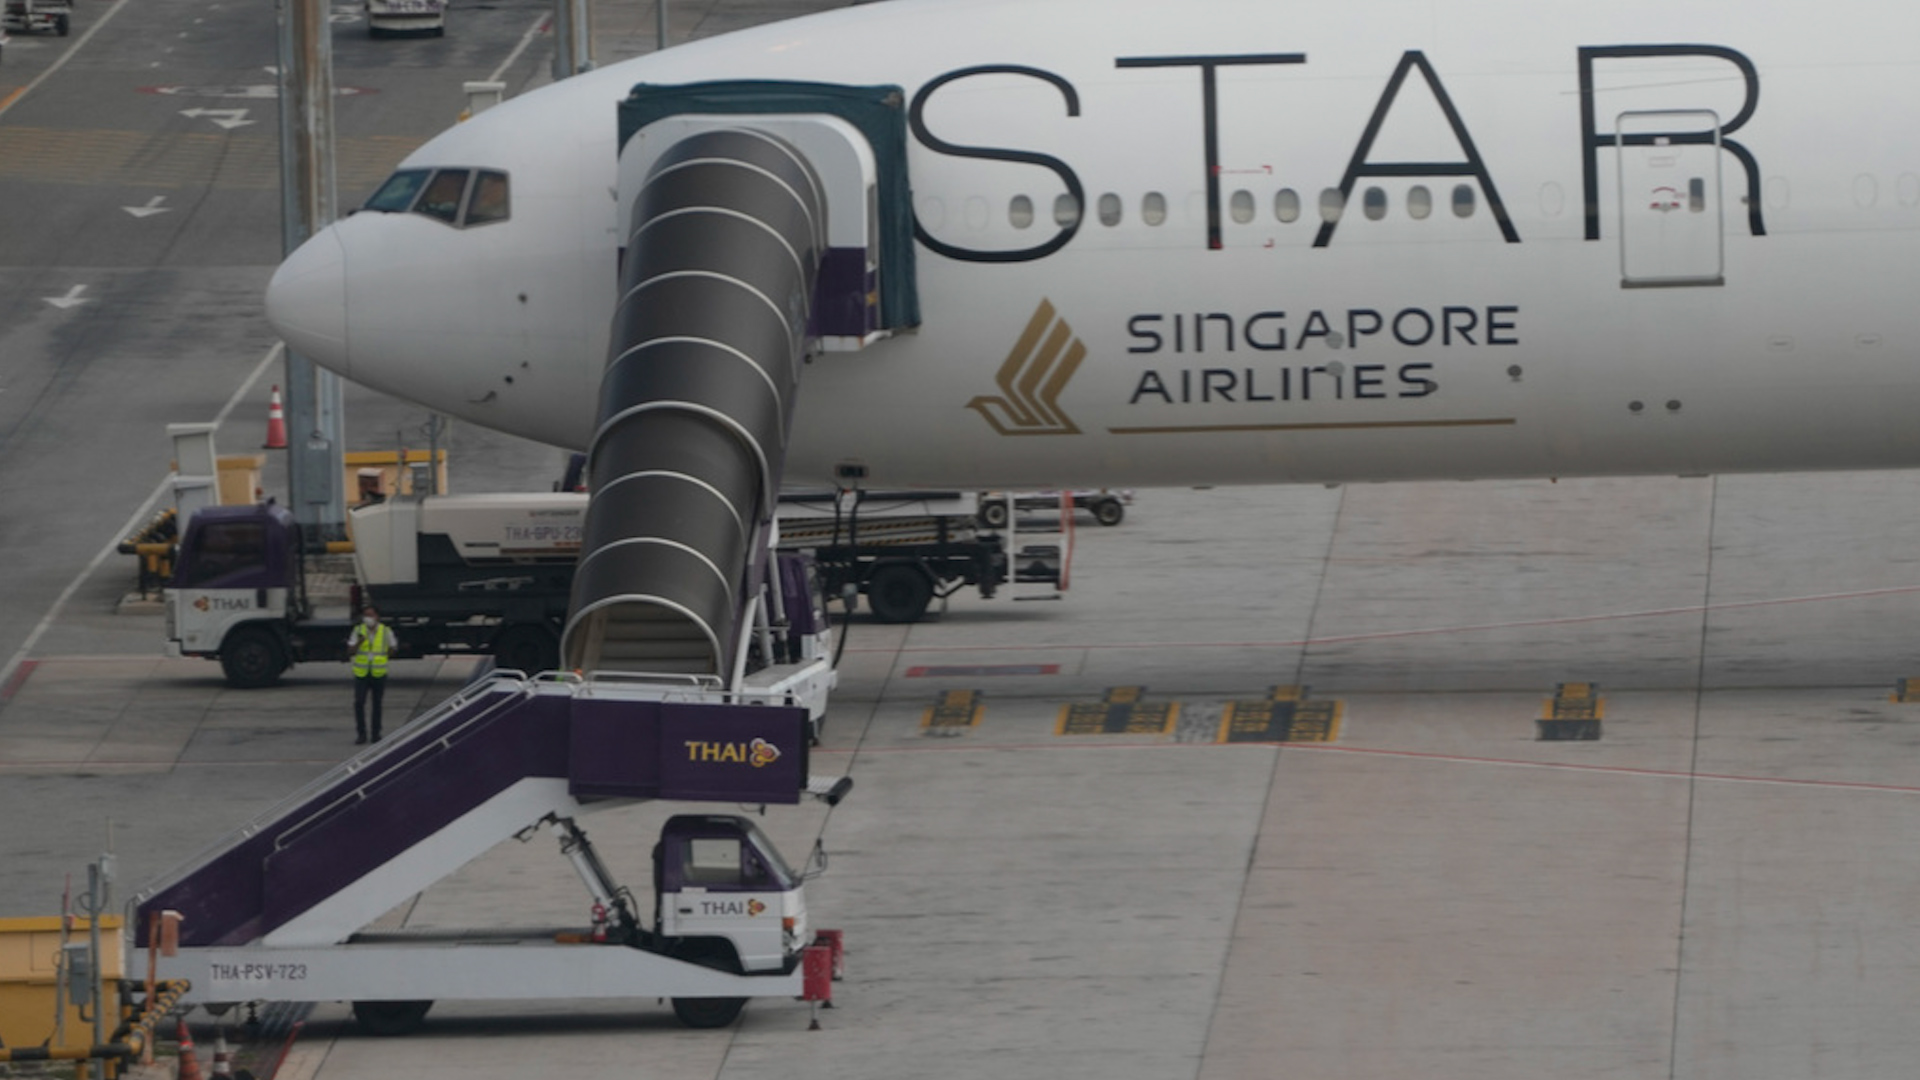 Most passengers from a Singapore Airlines reached their final destination after a flight that encountered turbulence, resulting in one death.